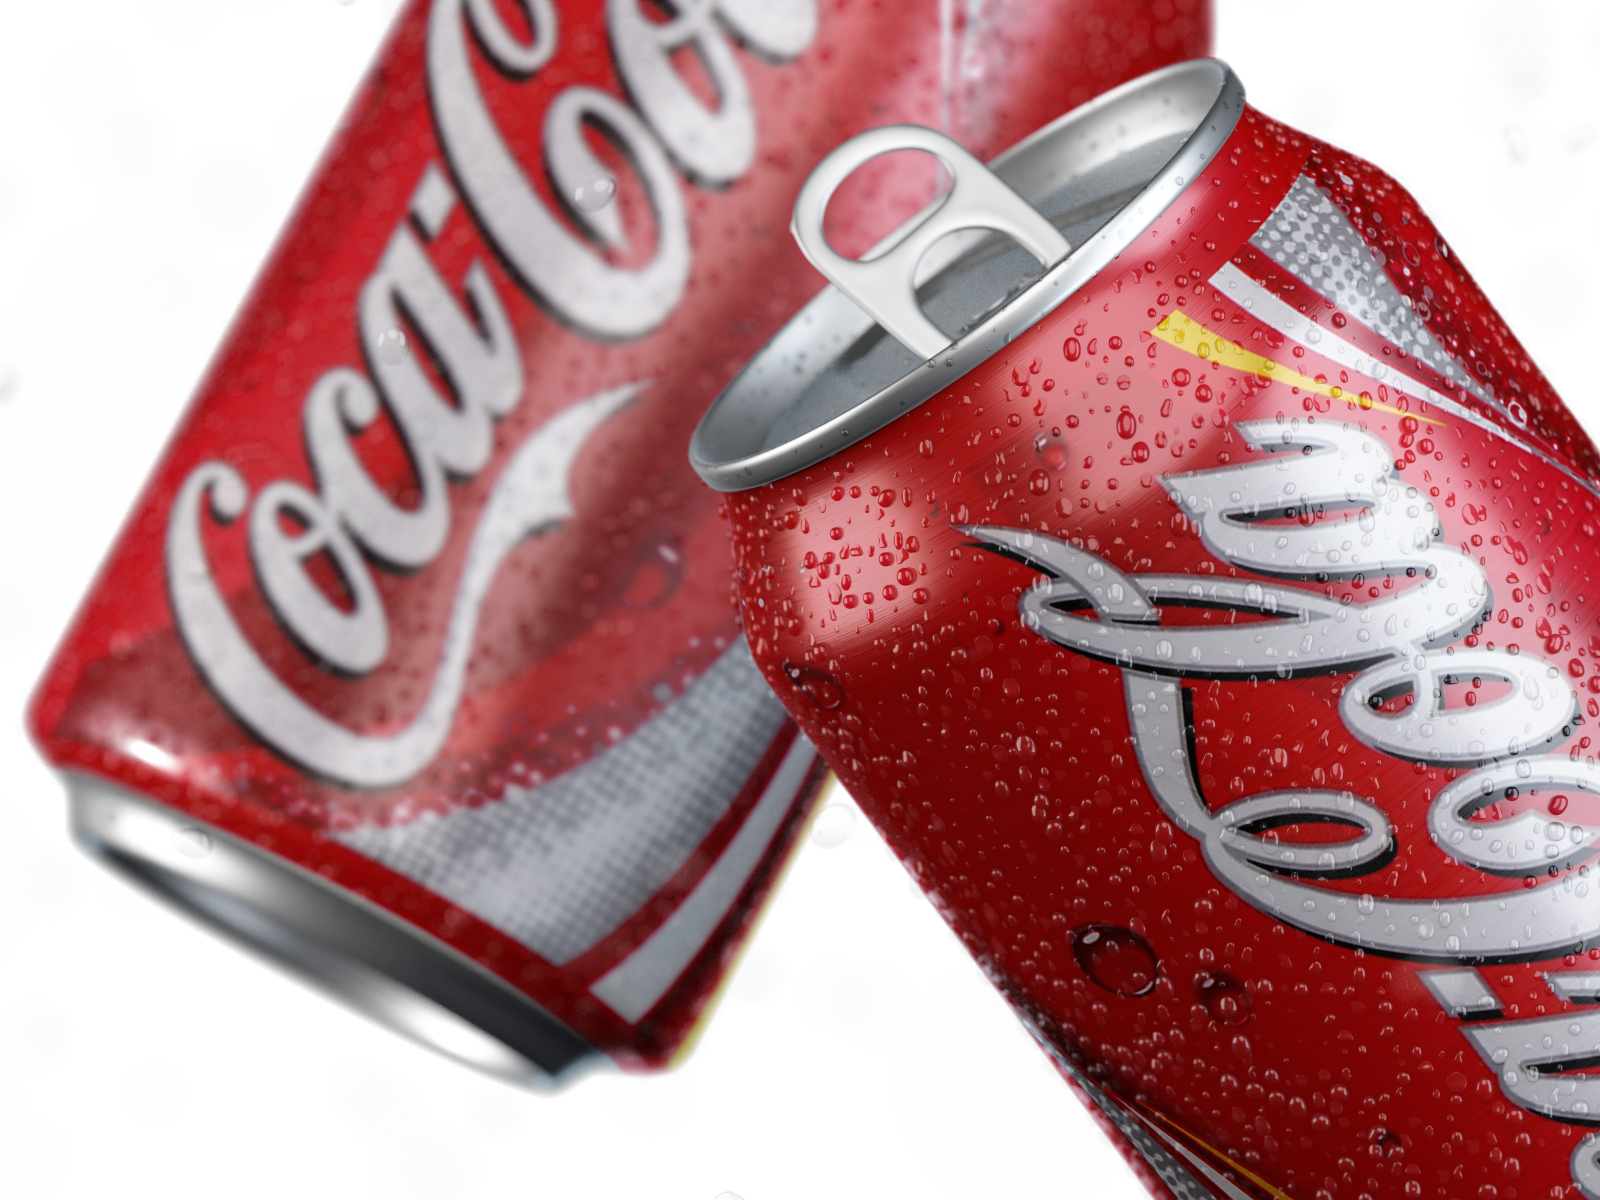 Coca Cola Can Animation by Brush Ross on Dribbble